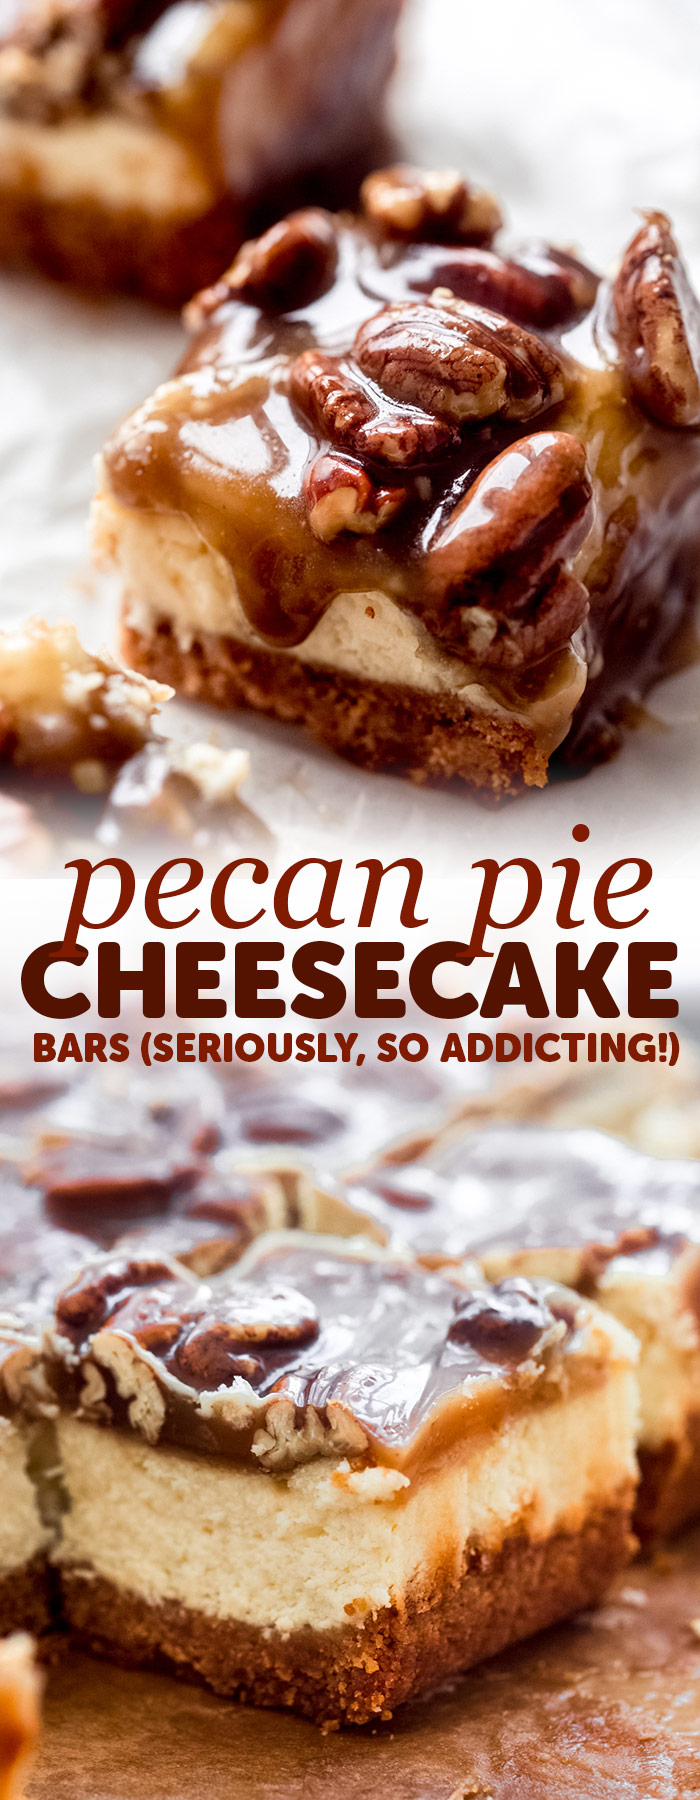 Pecan Pie Cheesecake Bars - Learn how to make the best cheesecake bars topped with pecan pie topping! These bars are absolutely addicting! #cheesecakebars #cheesecake #pecanpiebars #pecanpiecheesecakebar #christmas #thanksgiving #dessert | Littlespicejar.com